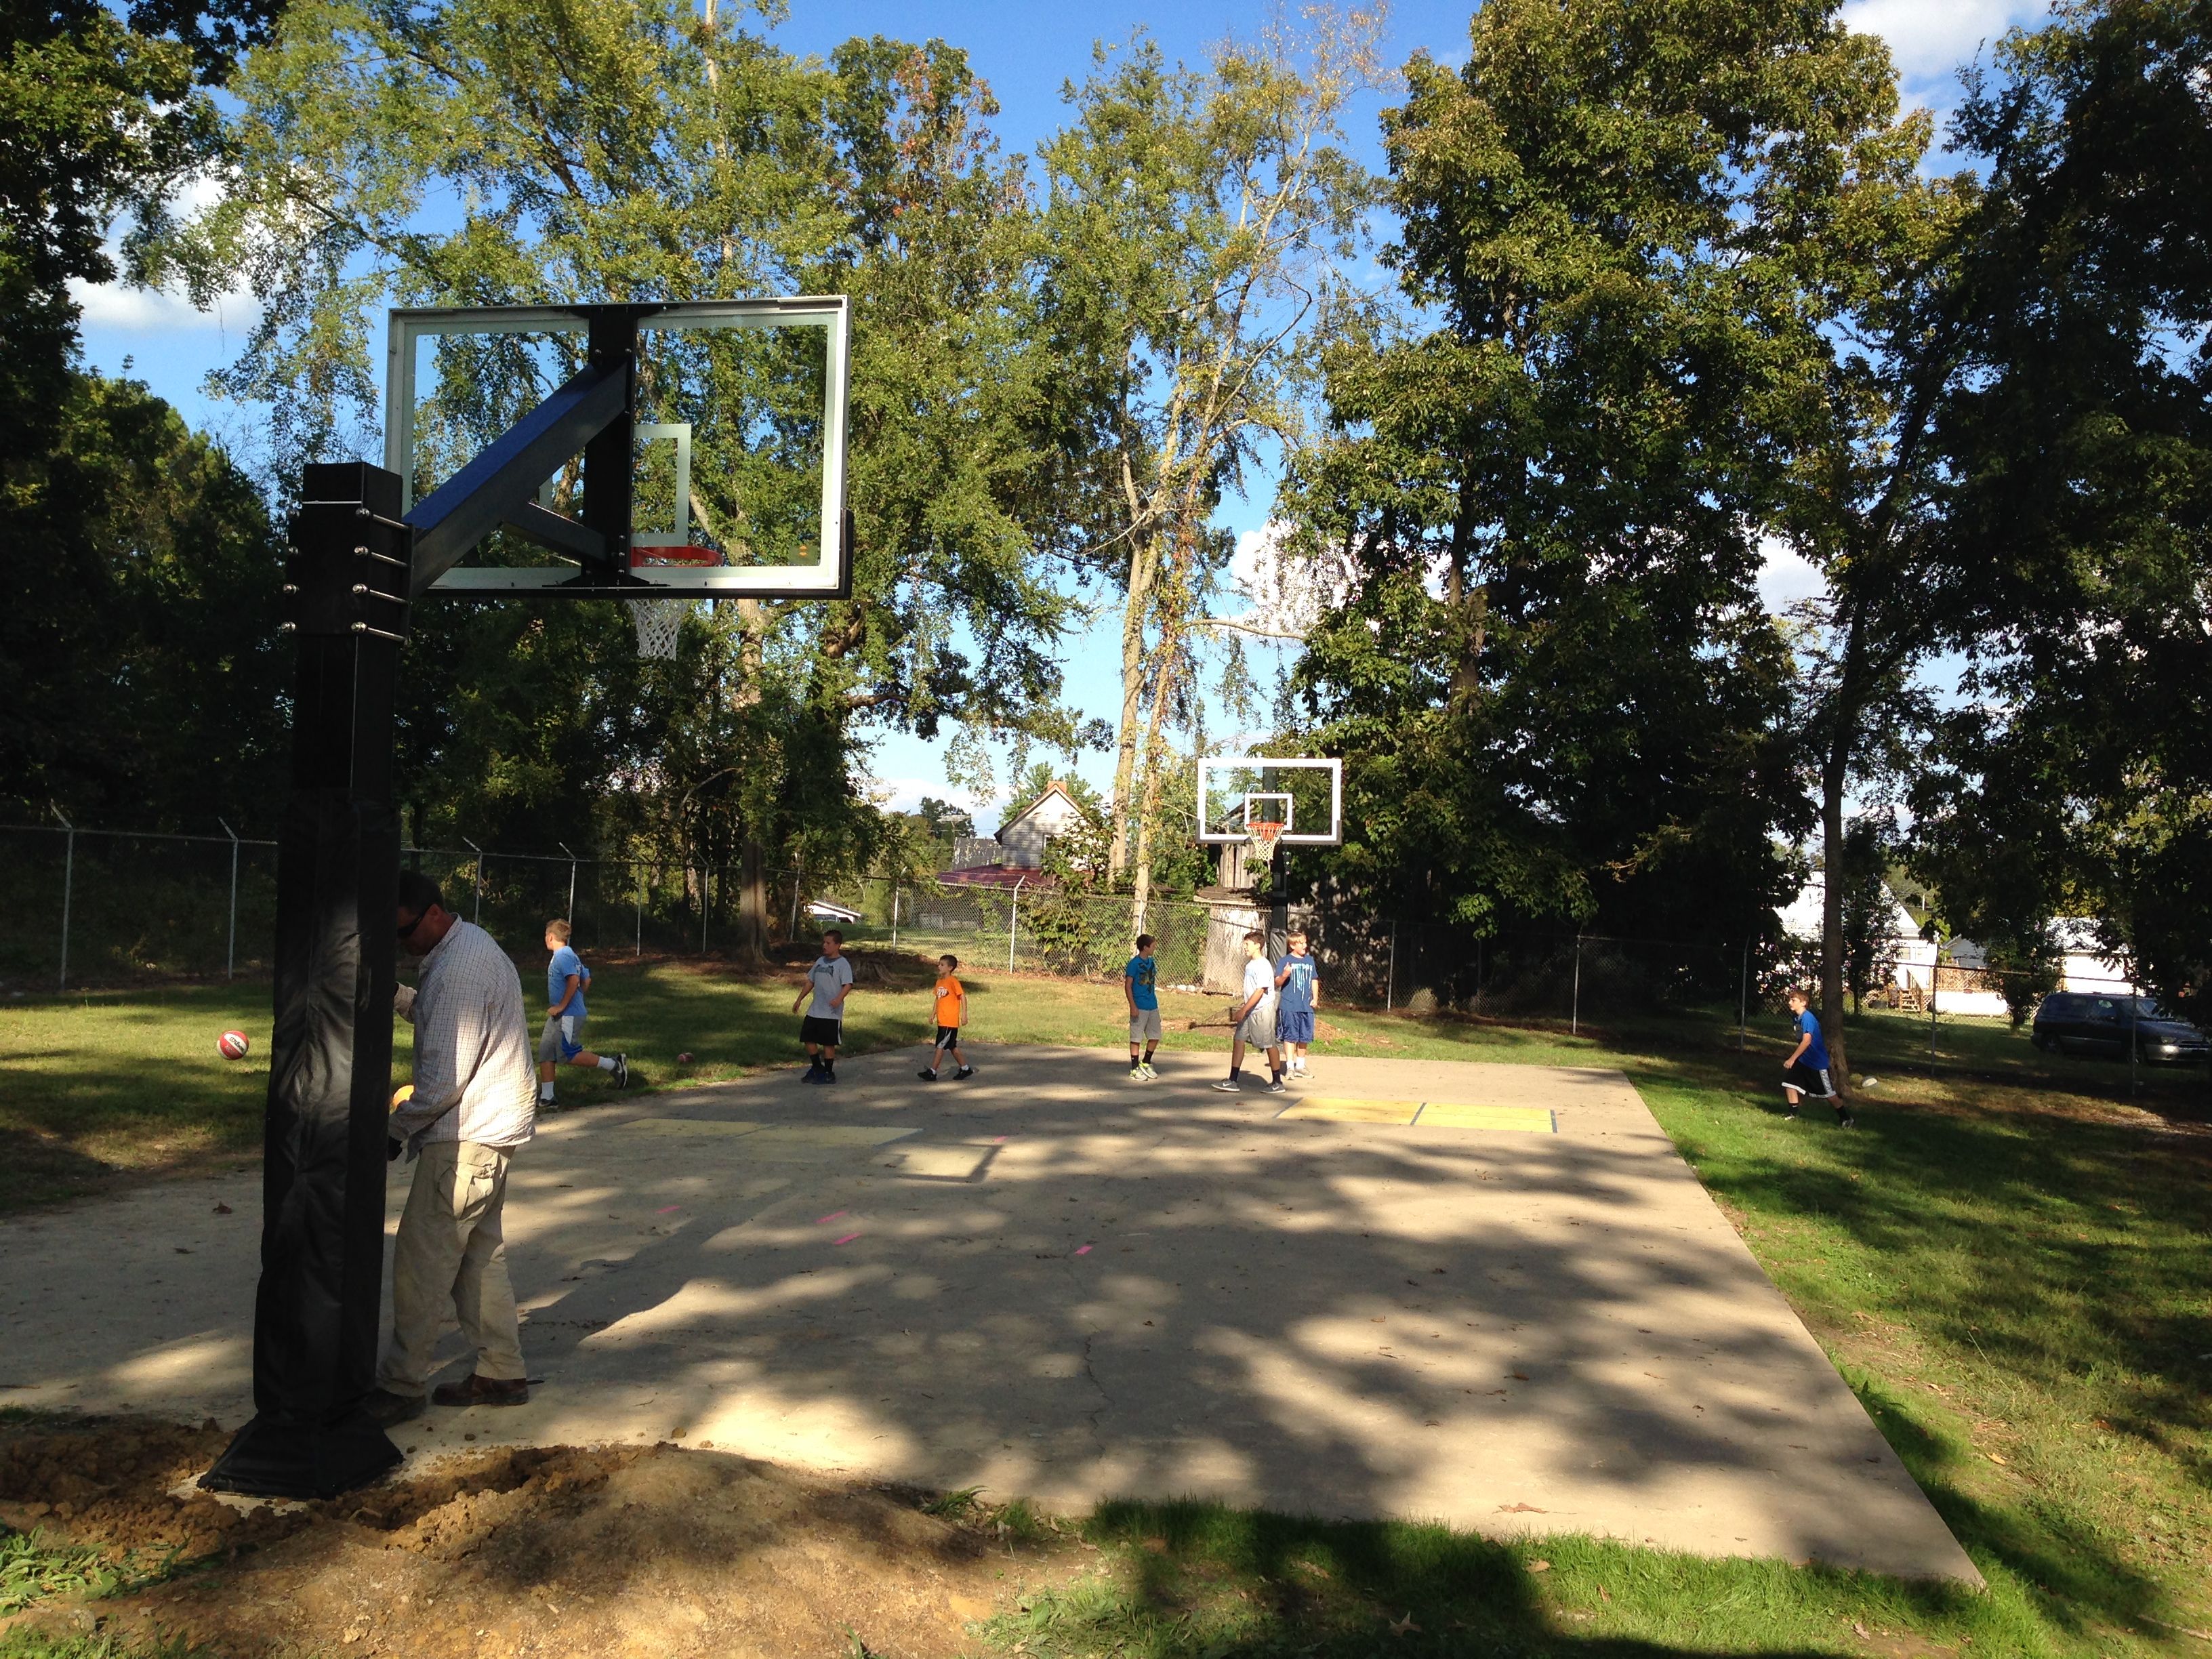 This Hercules Diamond Basketball system sits nestled among tall trees under a blue sky.